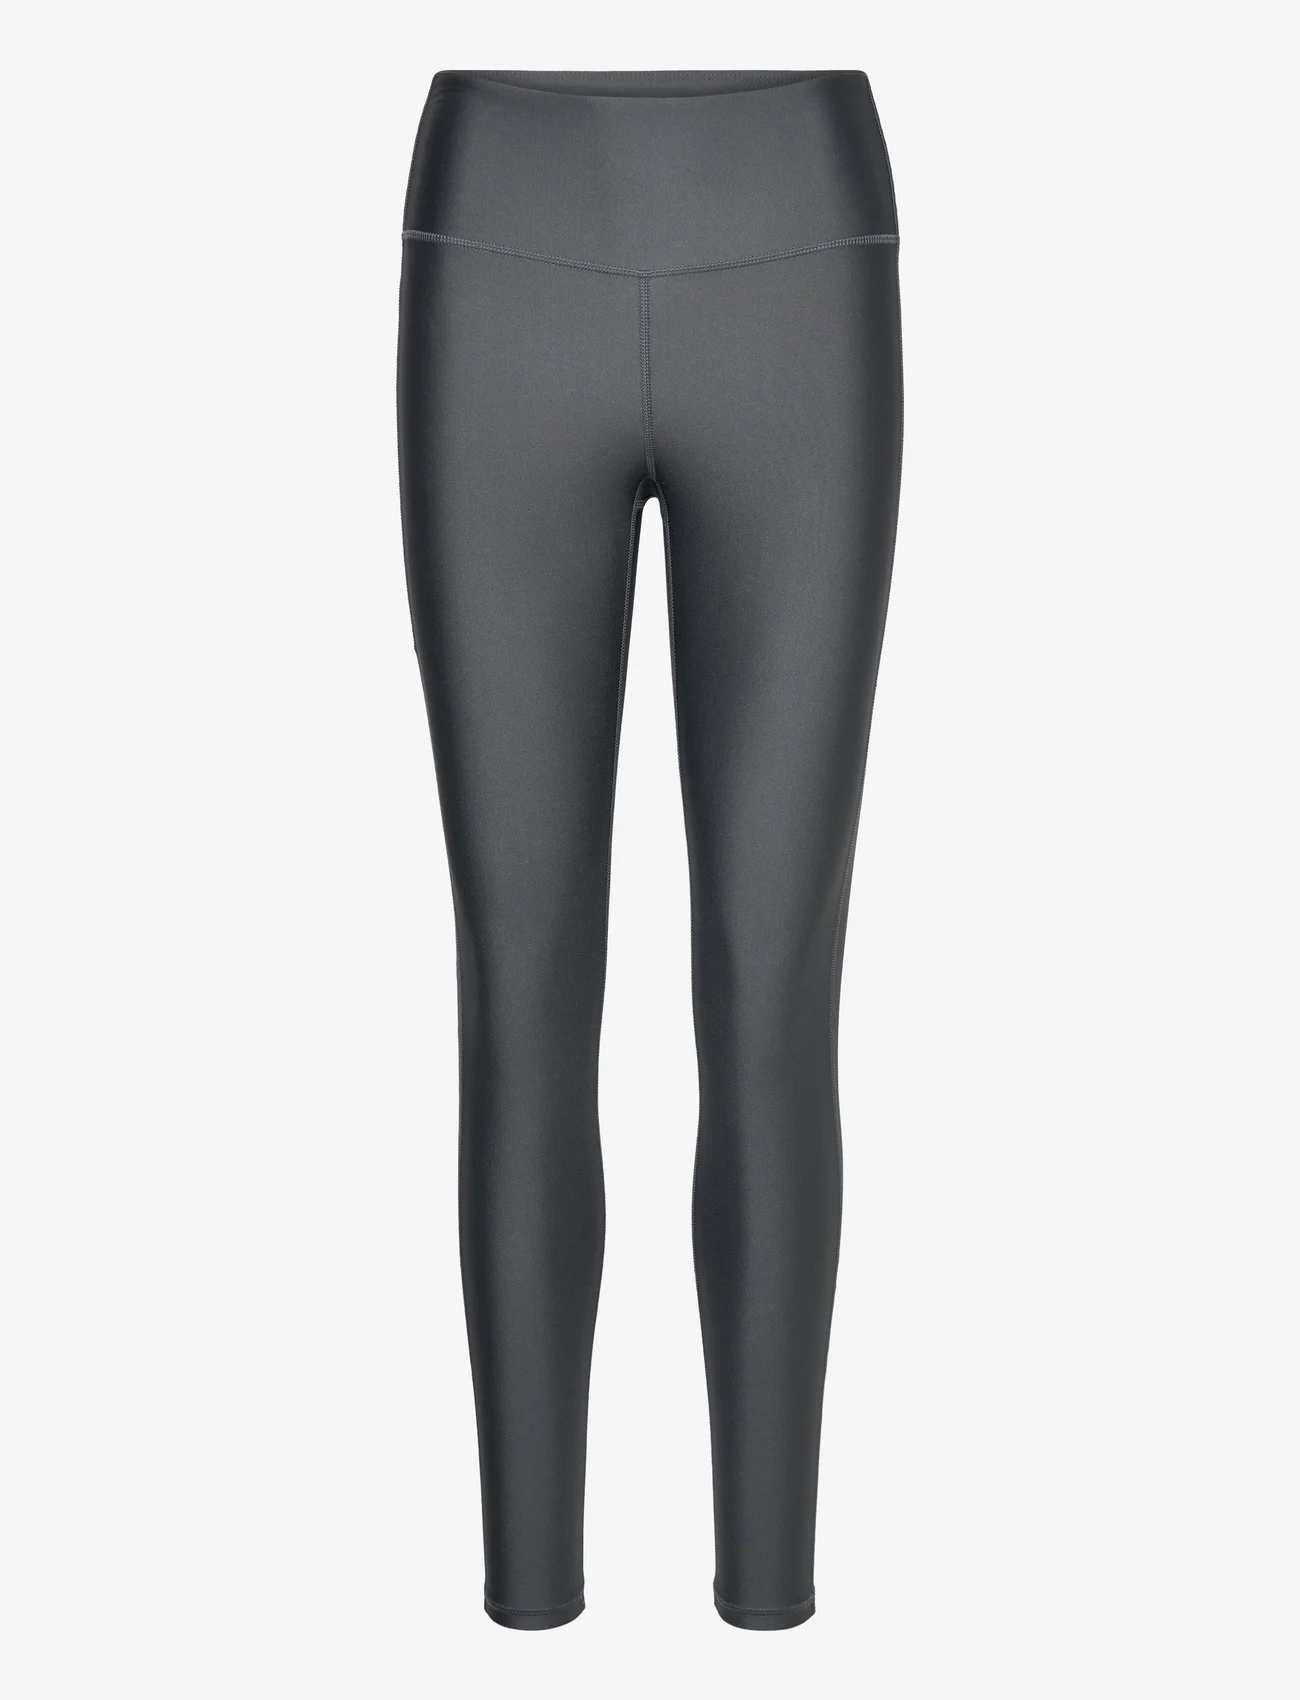 Under Armour - Armour Branded Legging - trænings- & løbetights - pitch gray - 0